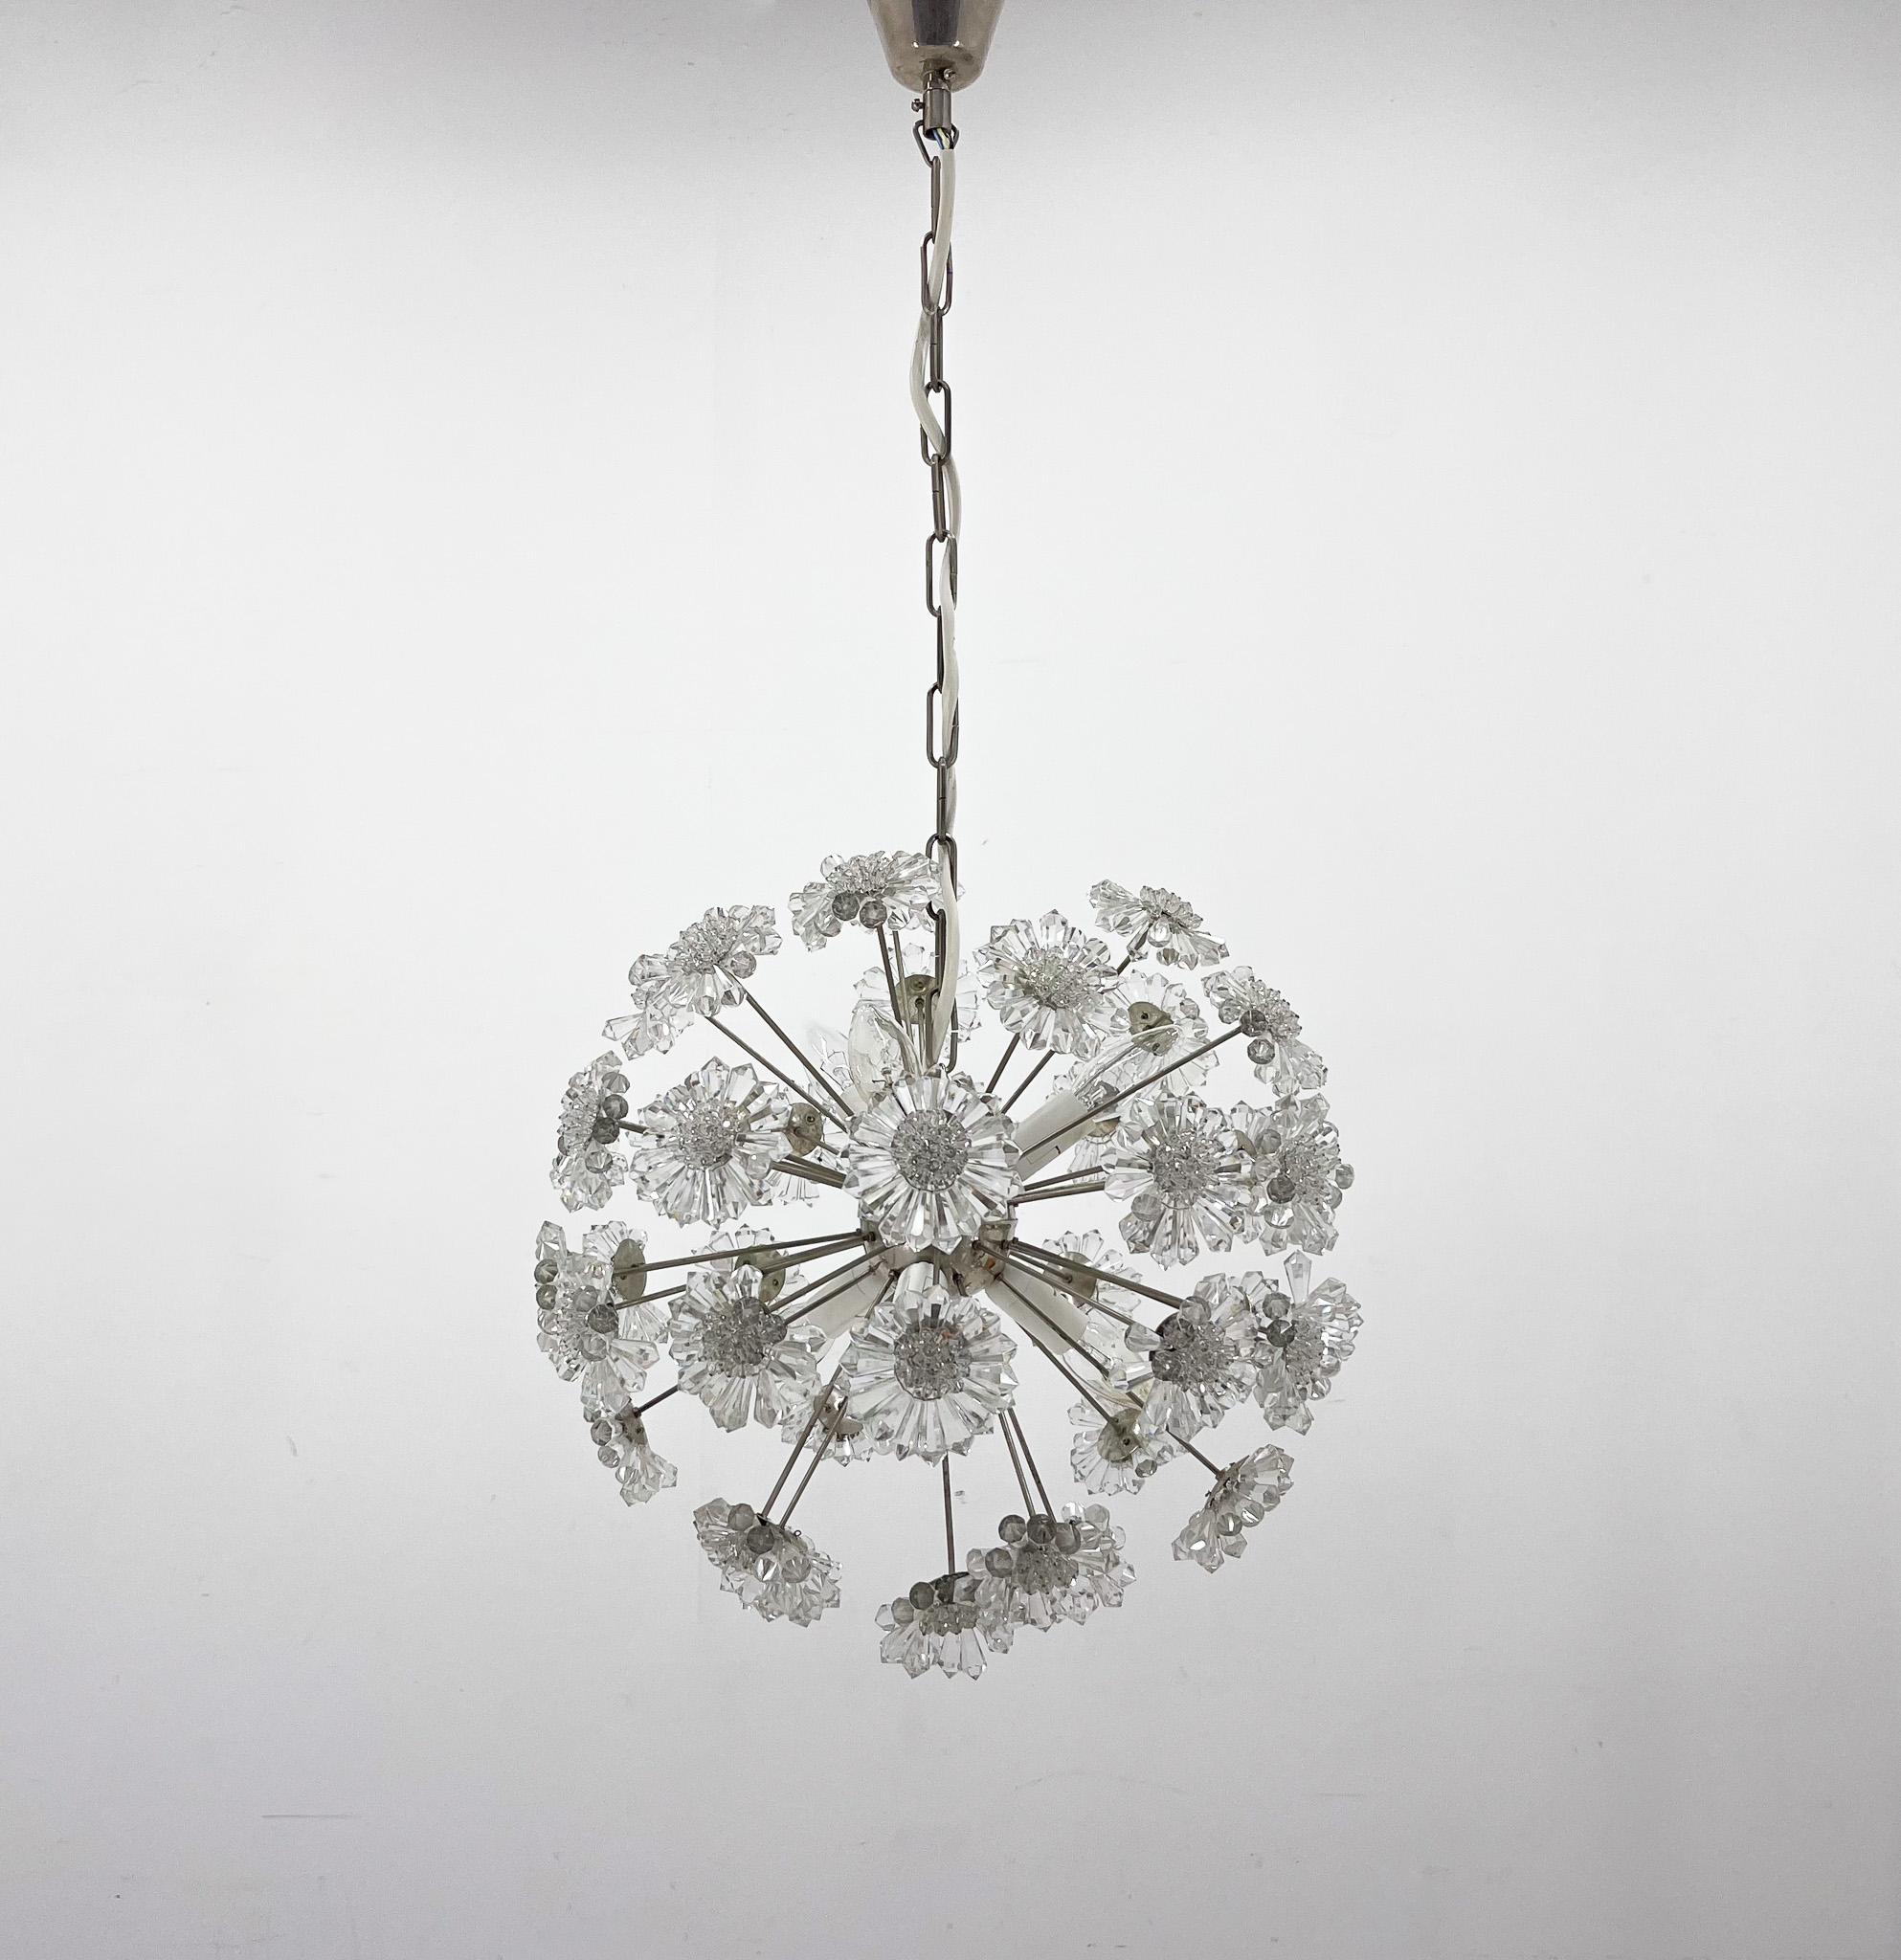 Beautiful crytal and chrom chandelier from the 1970's, produced by famous Preciosa. The chandelier is in original very good condition, only the sockets have been replaced. 
Bulbs: 6x E14. 
US wiring compatible.